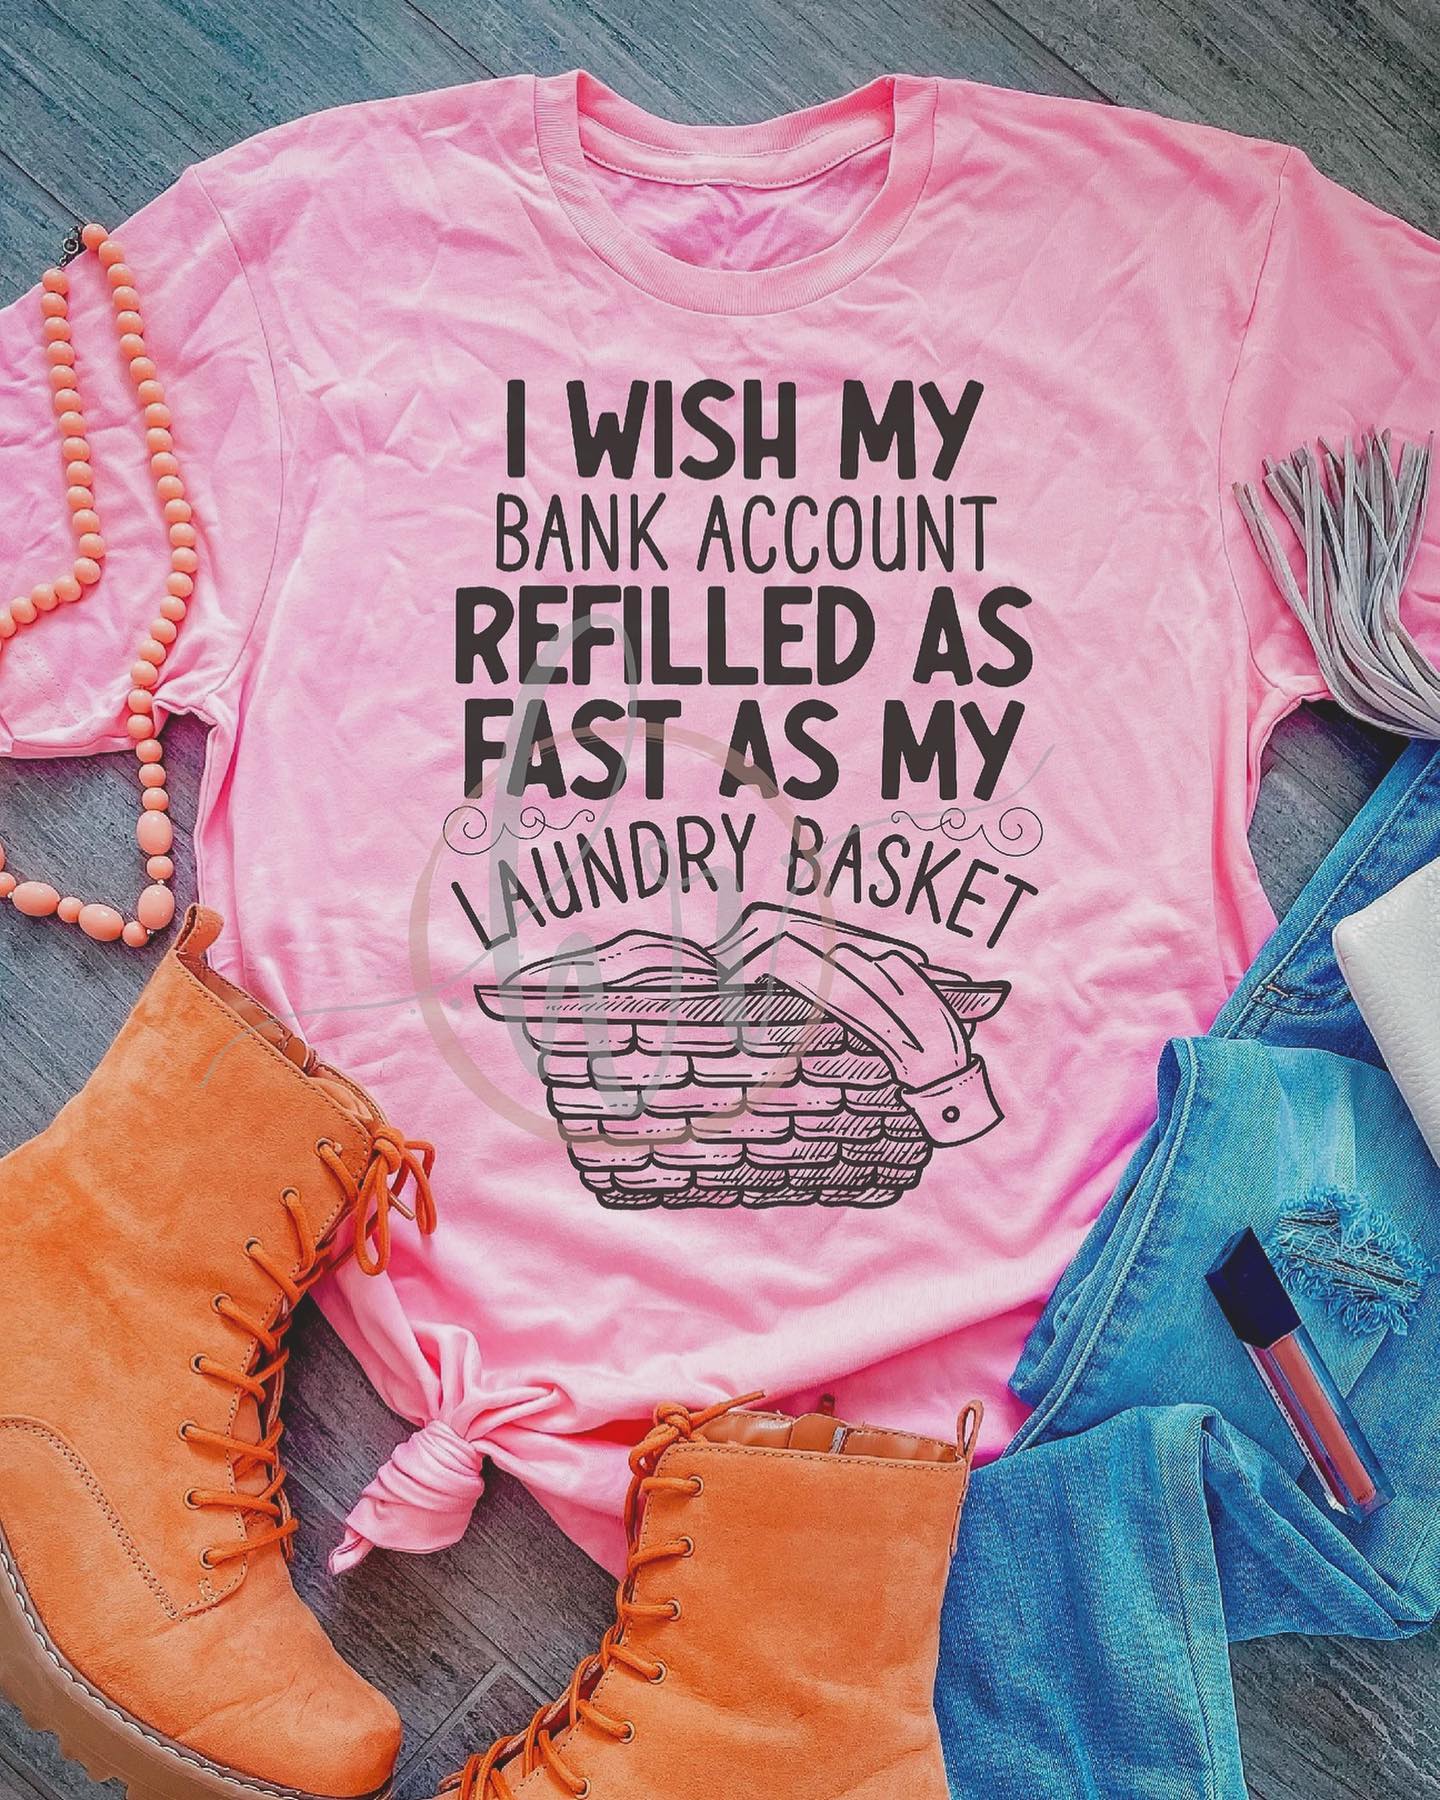 I wish my bank account refilled as fast as my laundry basket